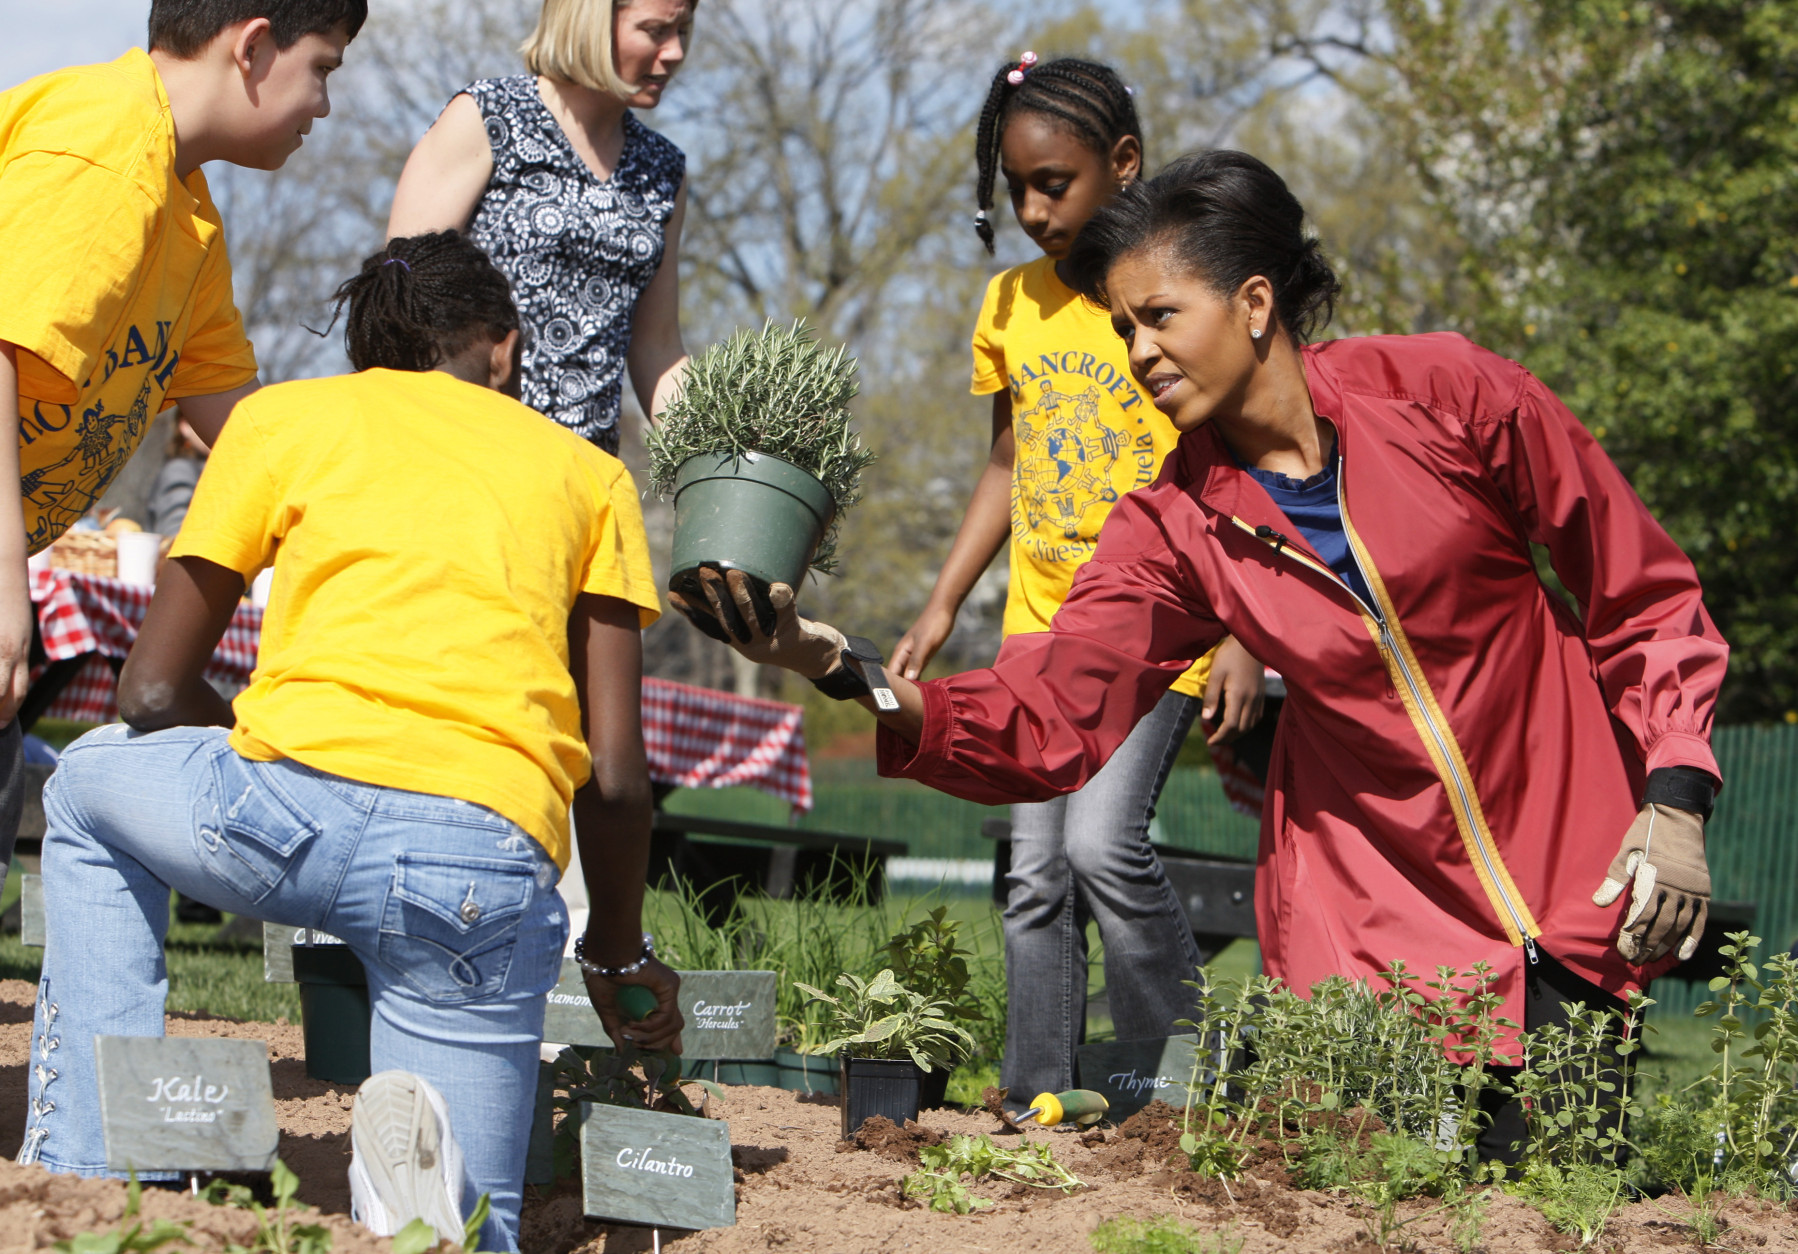 First lady Michelle Obama plants herbs on the White House Kitchen Garden with students from Bancroft Elementary School in Washington, Thursday, April 9, 2009, on the South Lawn of the White House in Washington. (AP Photo/Charles Dharapak)